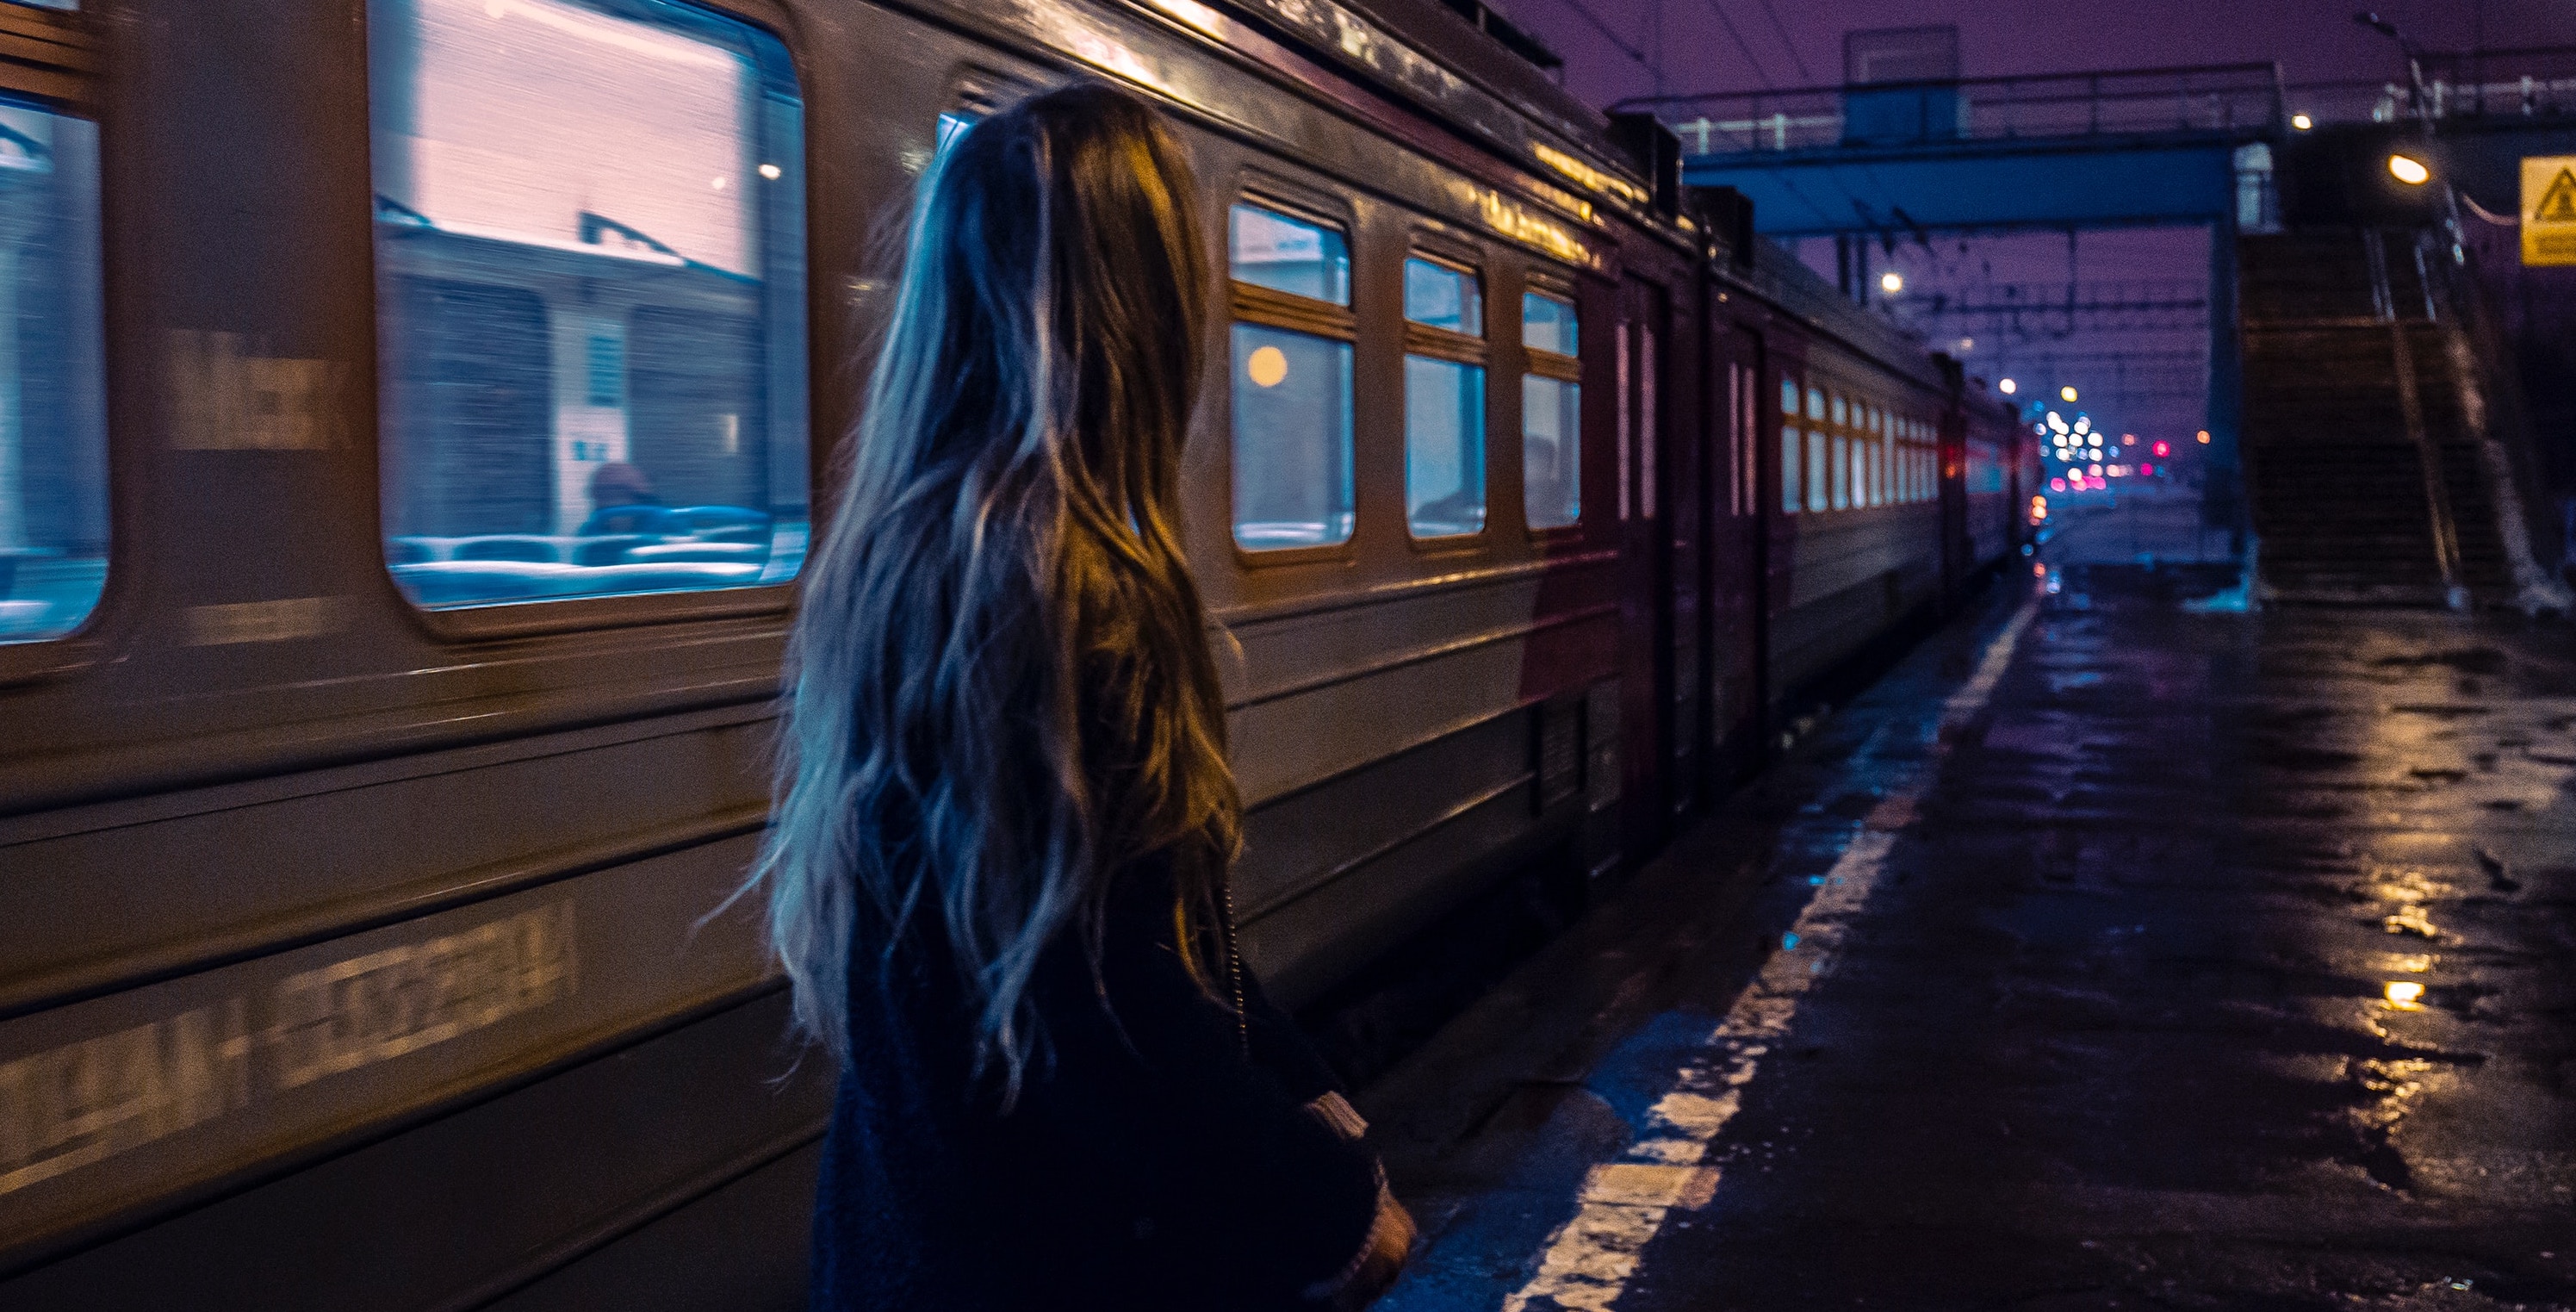 A woman standing in front of a train at night.